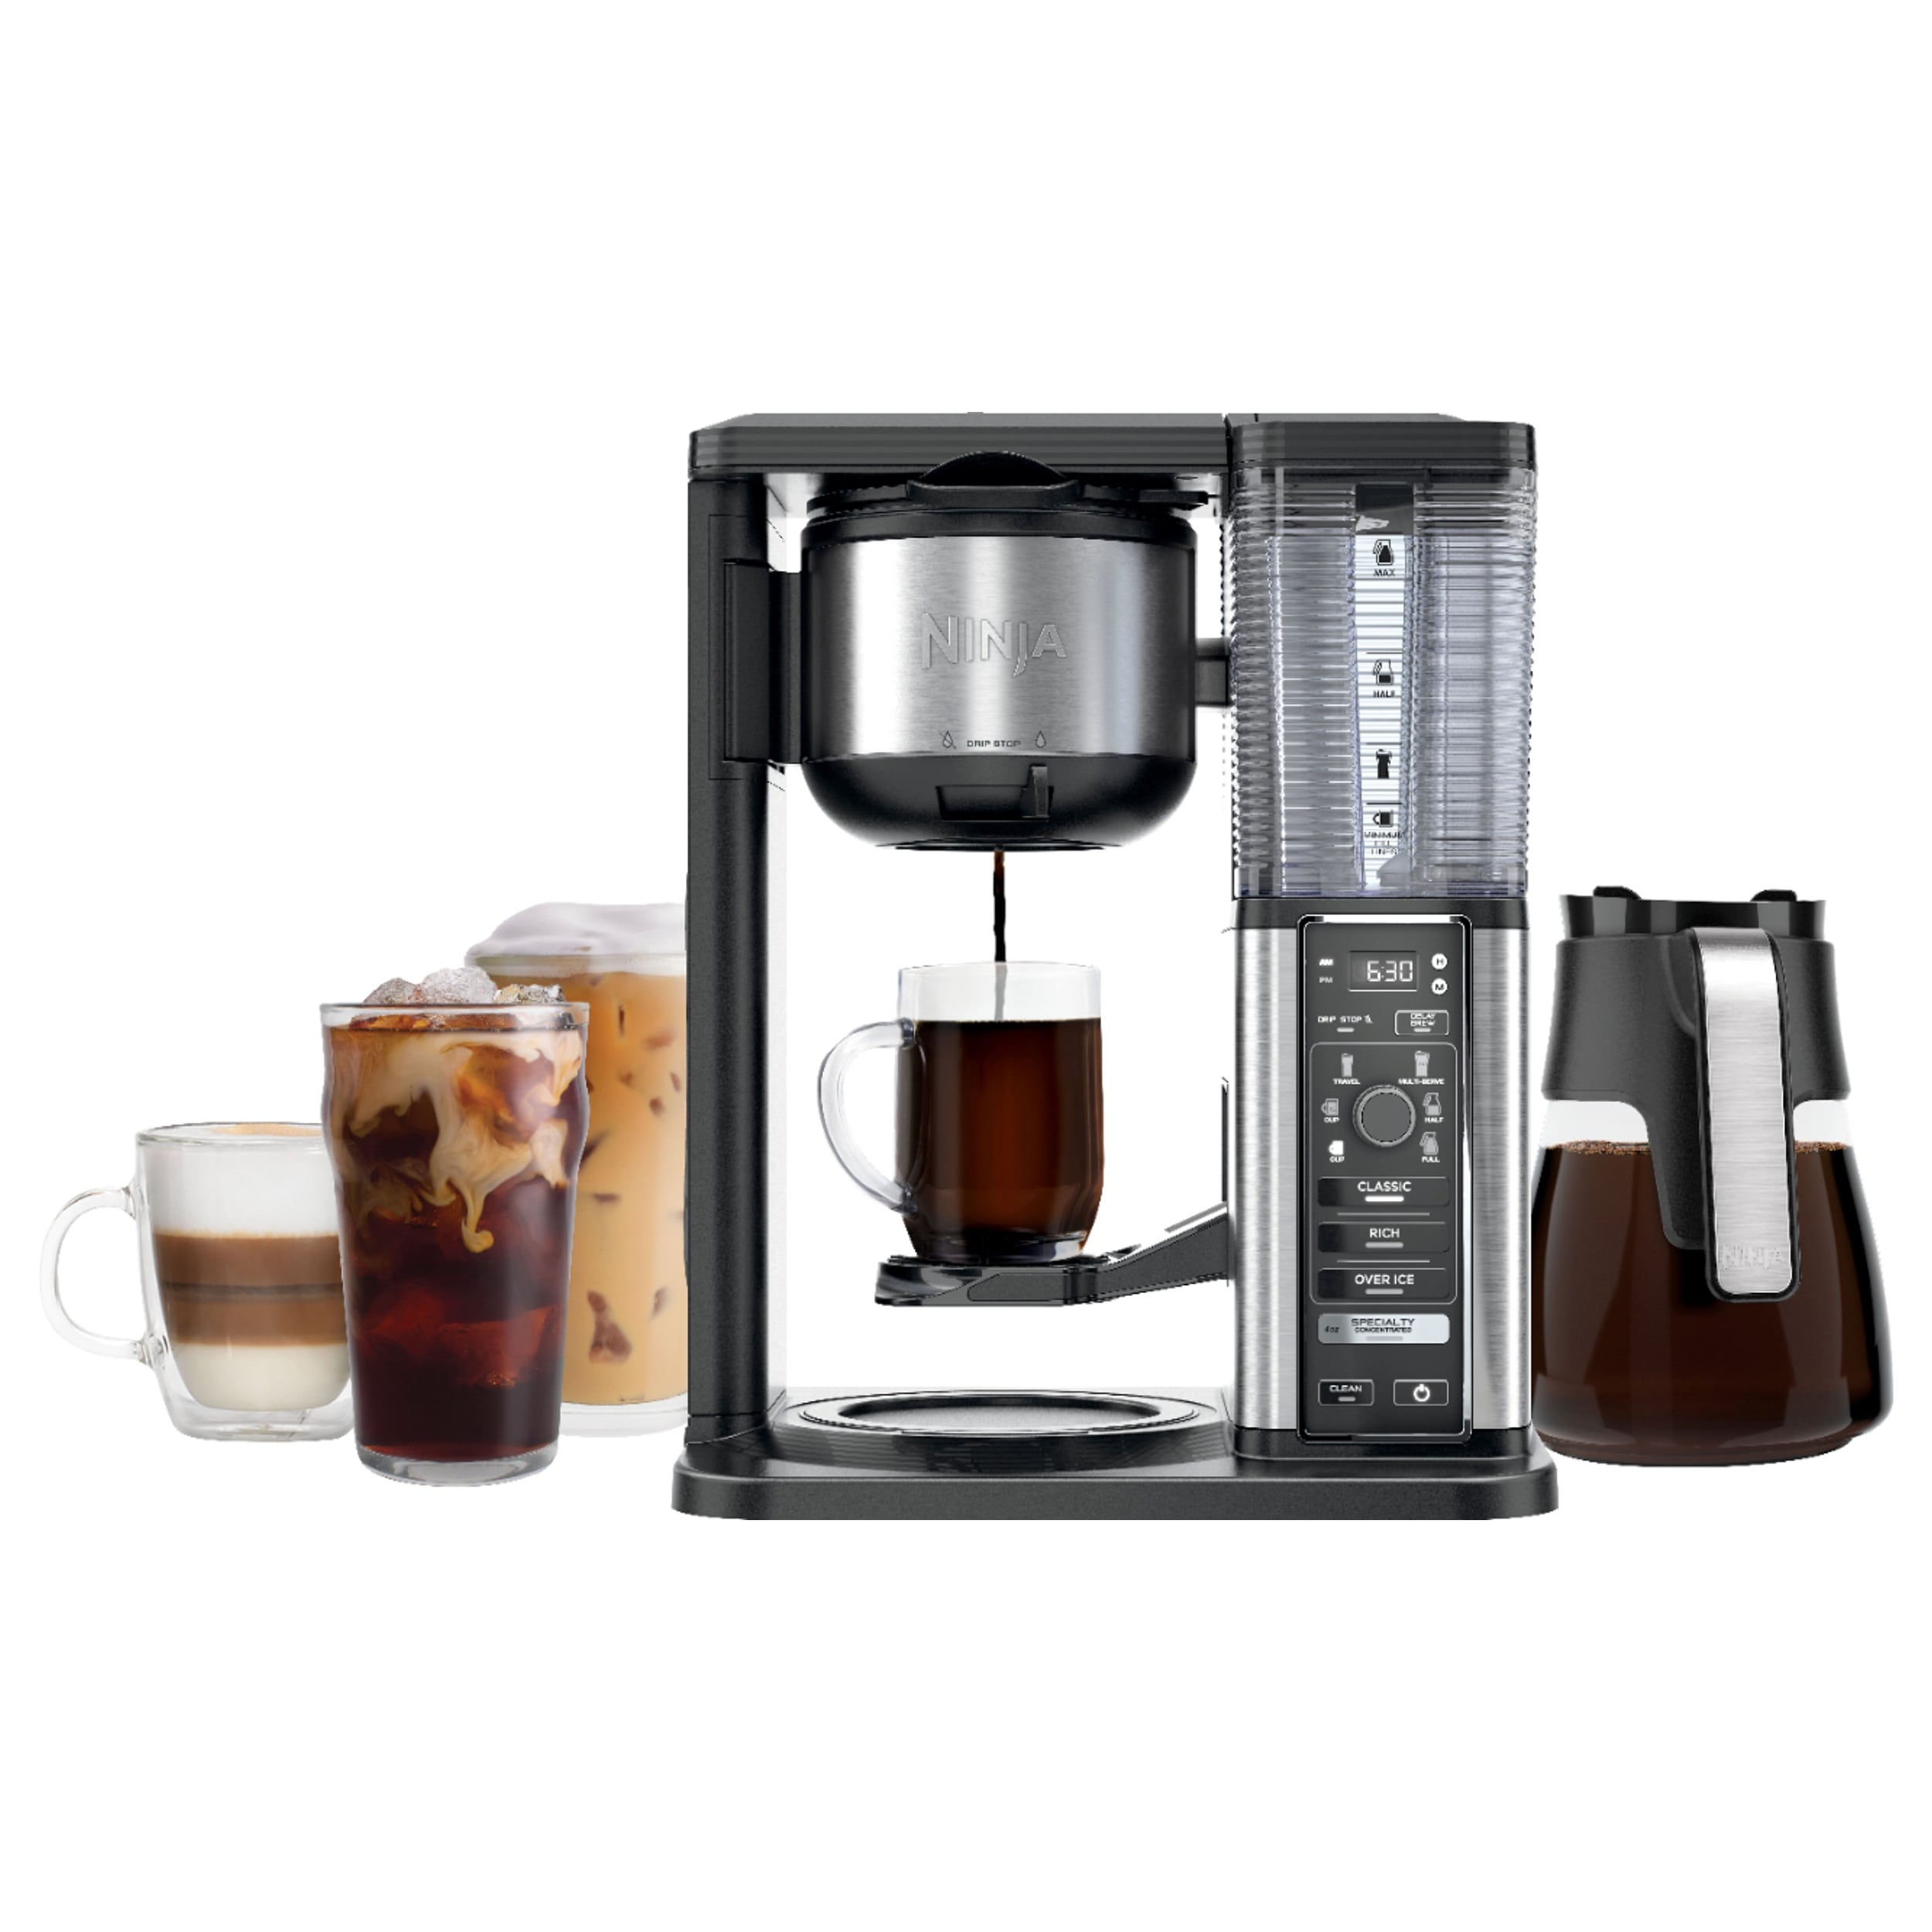 https://ak1.ostkcdn.com/images/products/is/images/direct/c84542cd04bba6342097aef745cfd300ec3b307b/Ninja-Specialty-Coffee-Maker-with-Glass-Garage.jpg